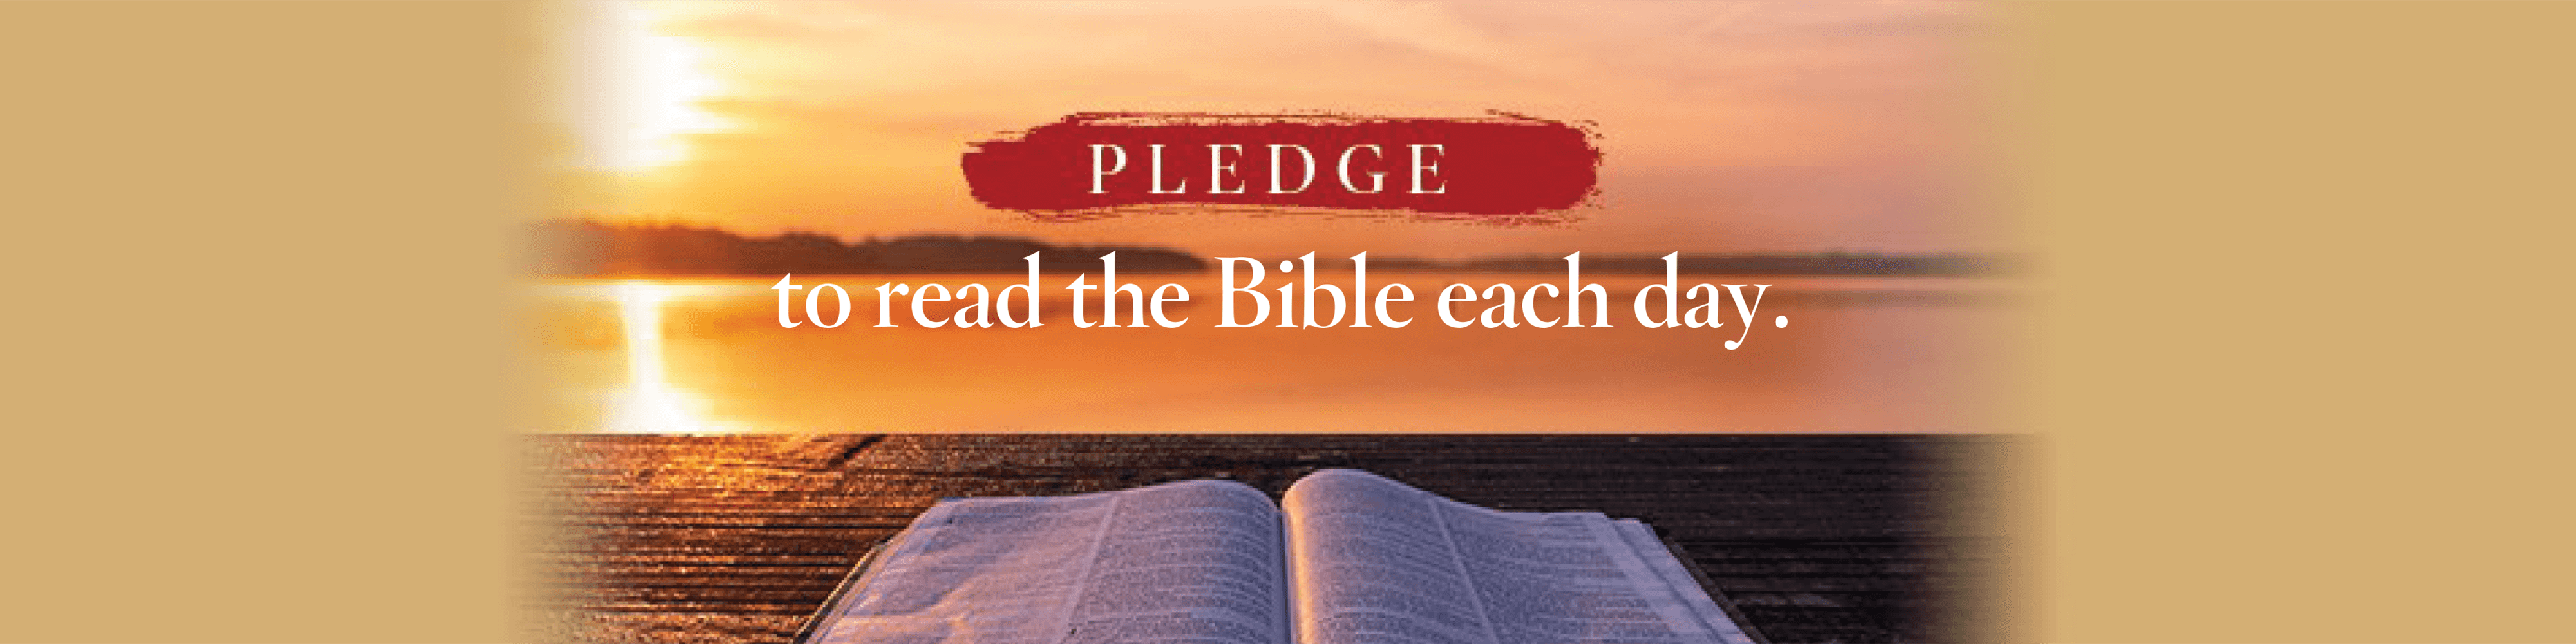 Pledge to Read the Bible Each Day.